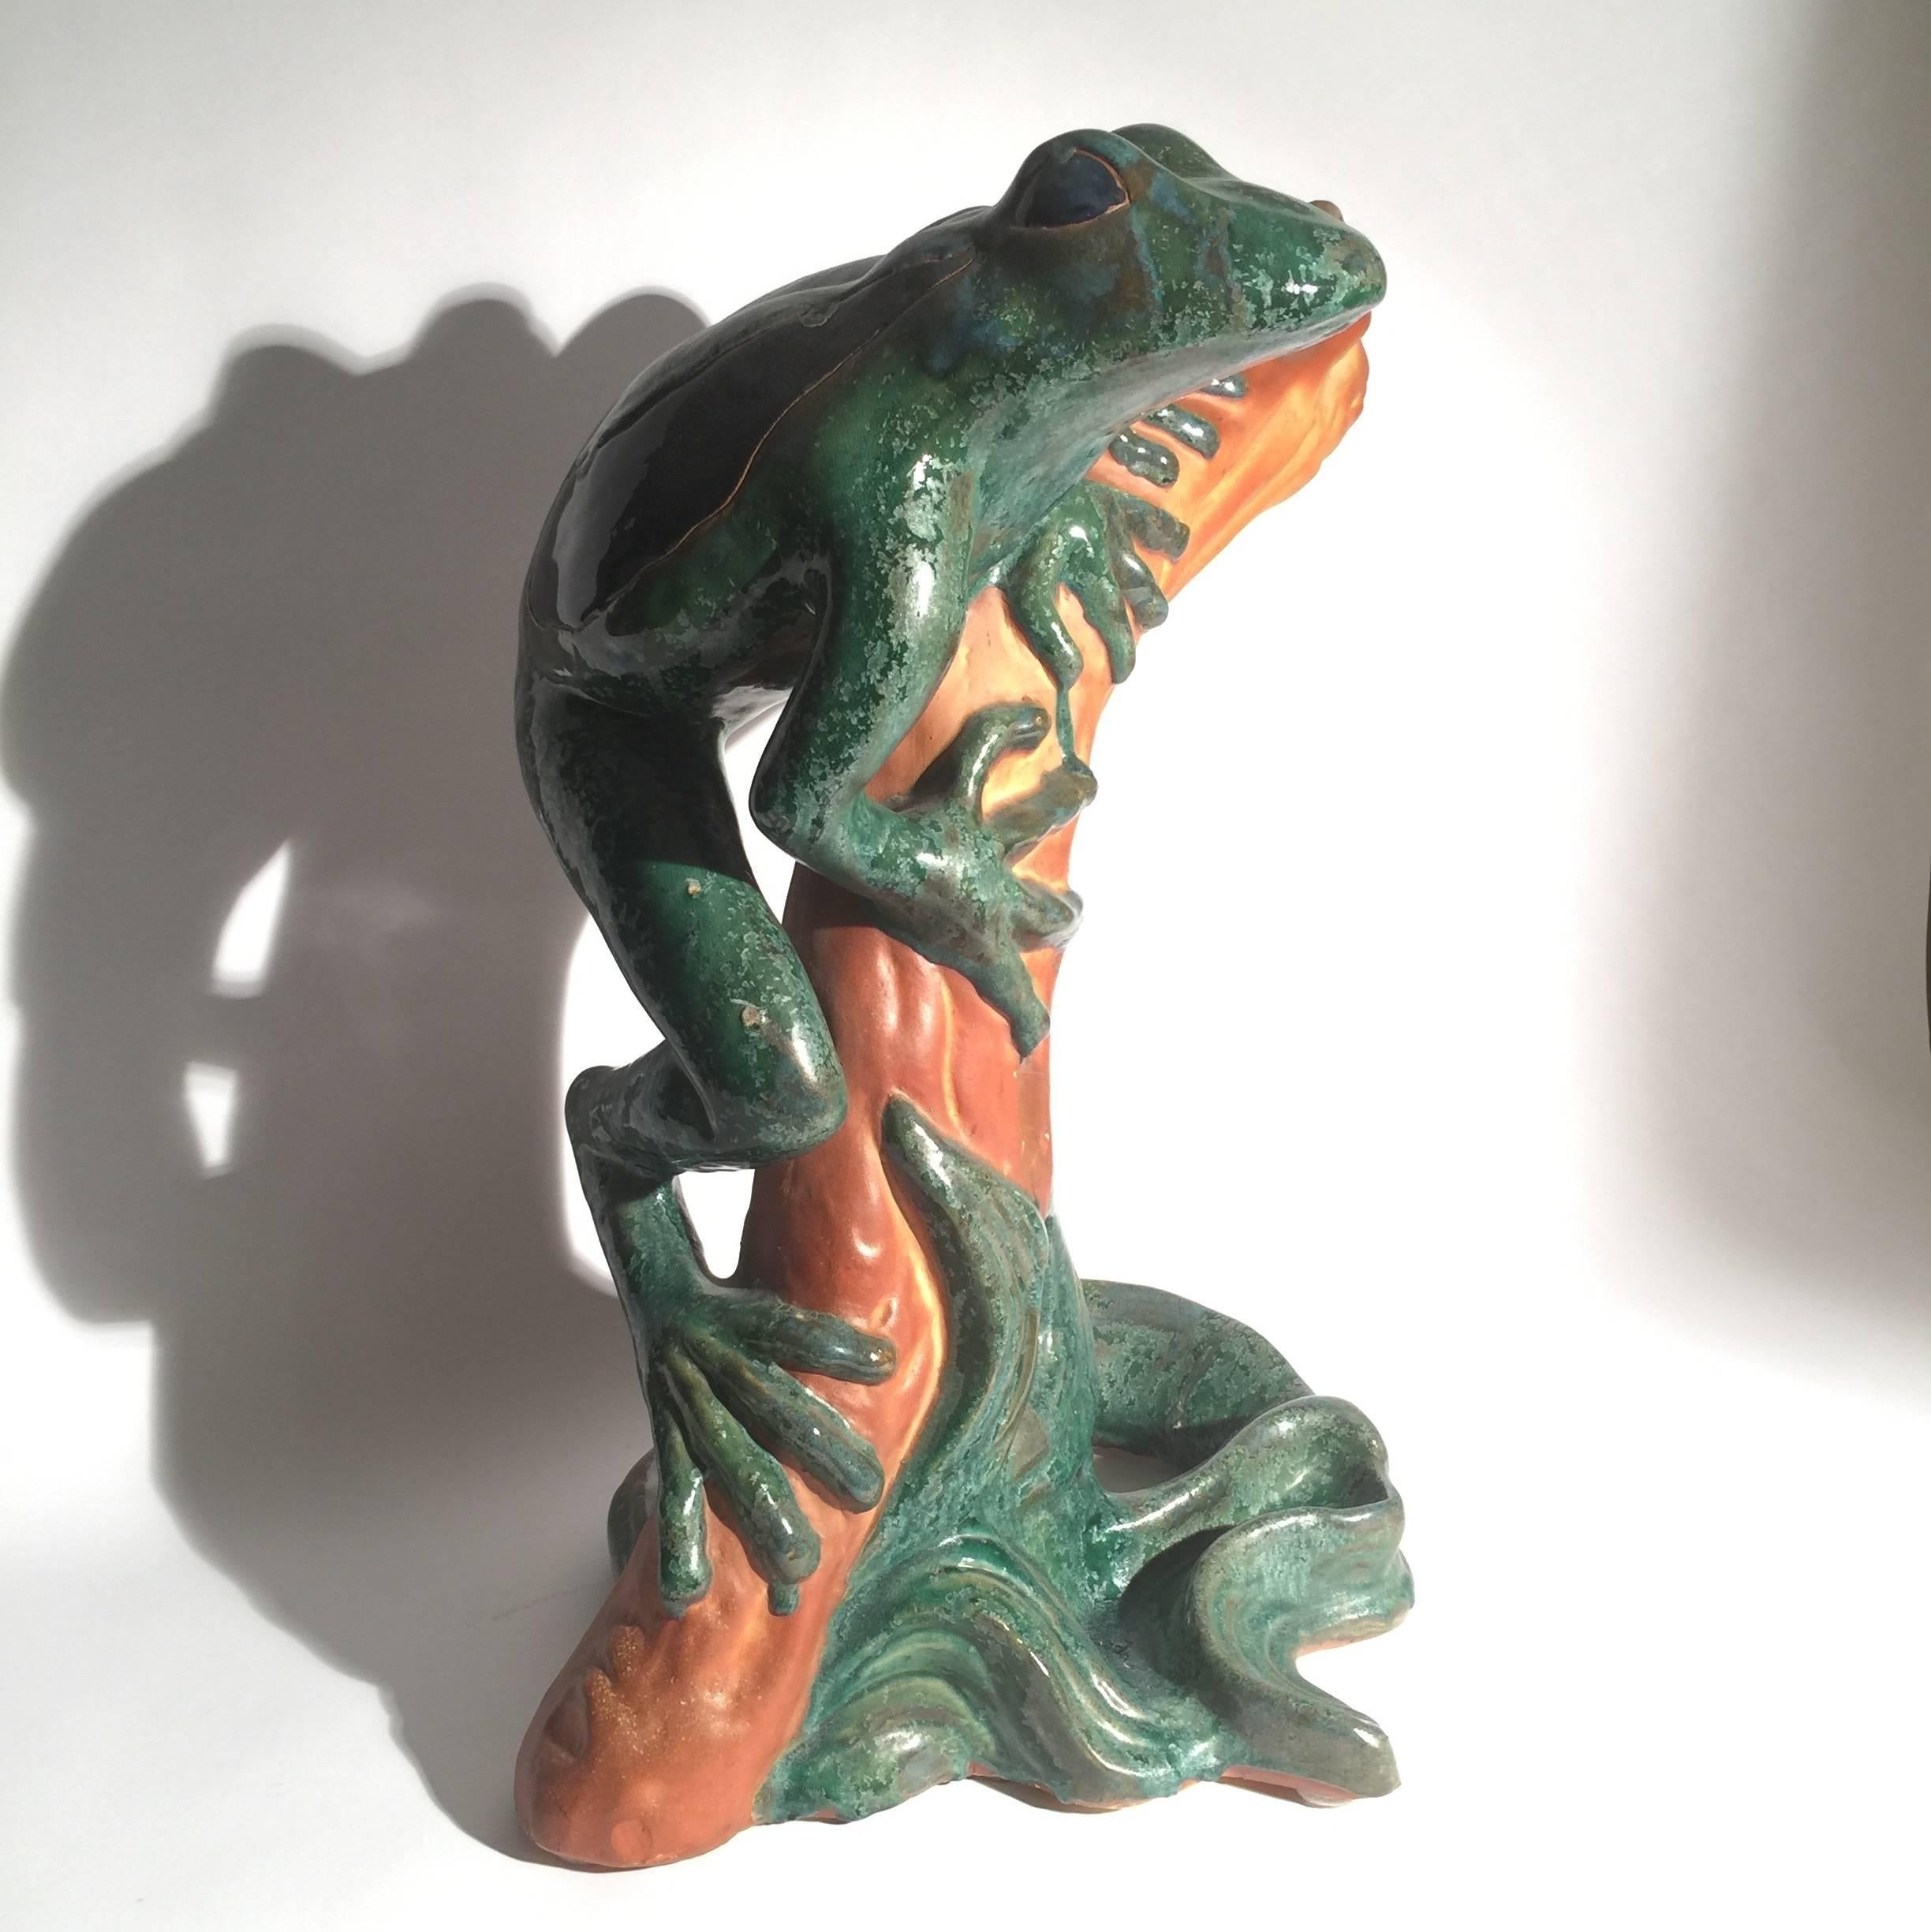 Whimsical mid-20th century sculpture of a frog on branch. Vibrant color and unexpected size.